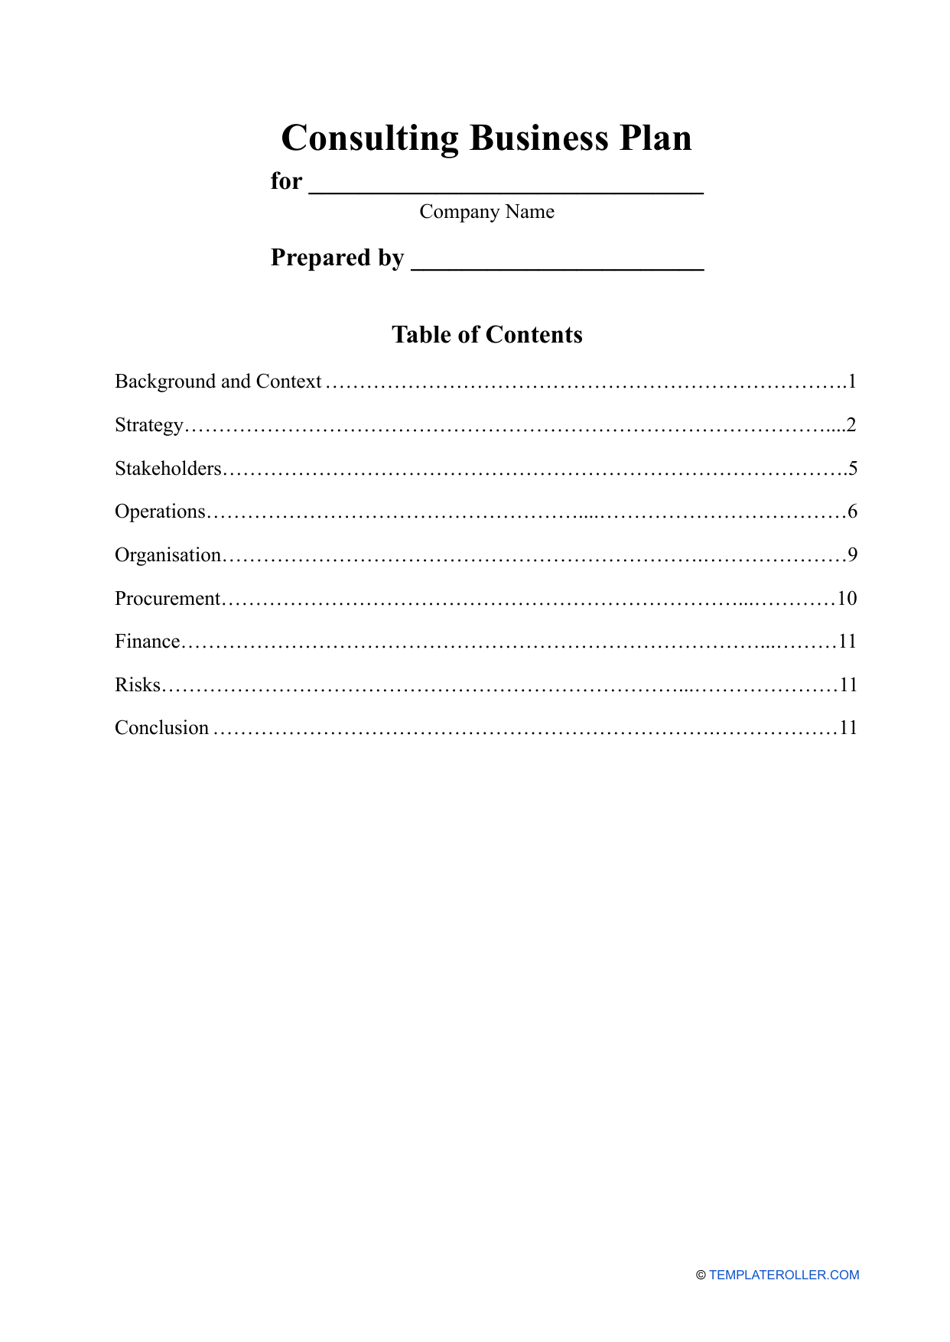 Consulting Business Plan Template, Page 1